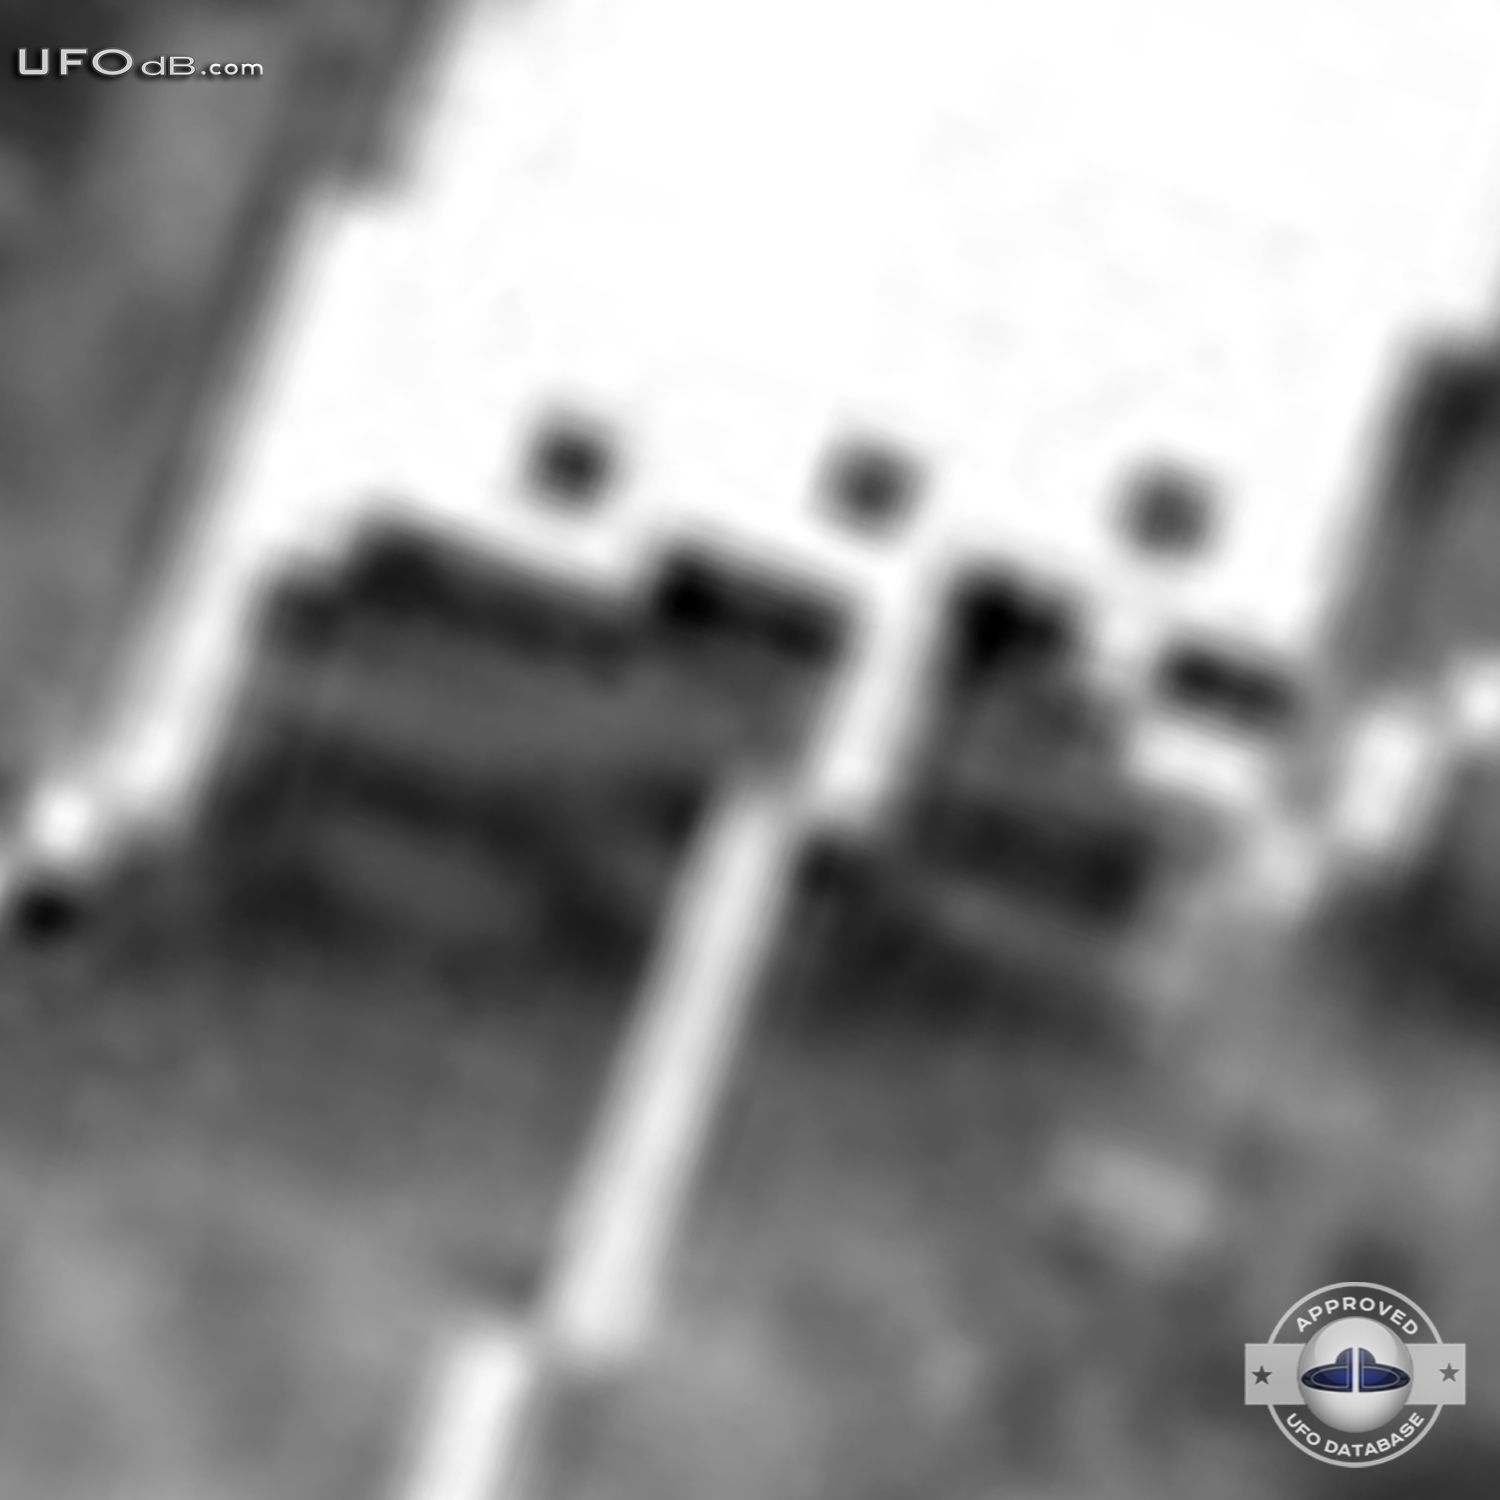 Satellite catches UFOs passing over the south of Taiwan | May 19 2011 UFO Picture #308-7